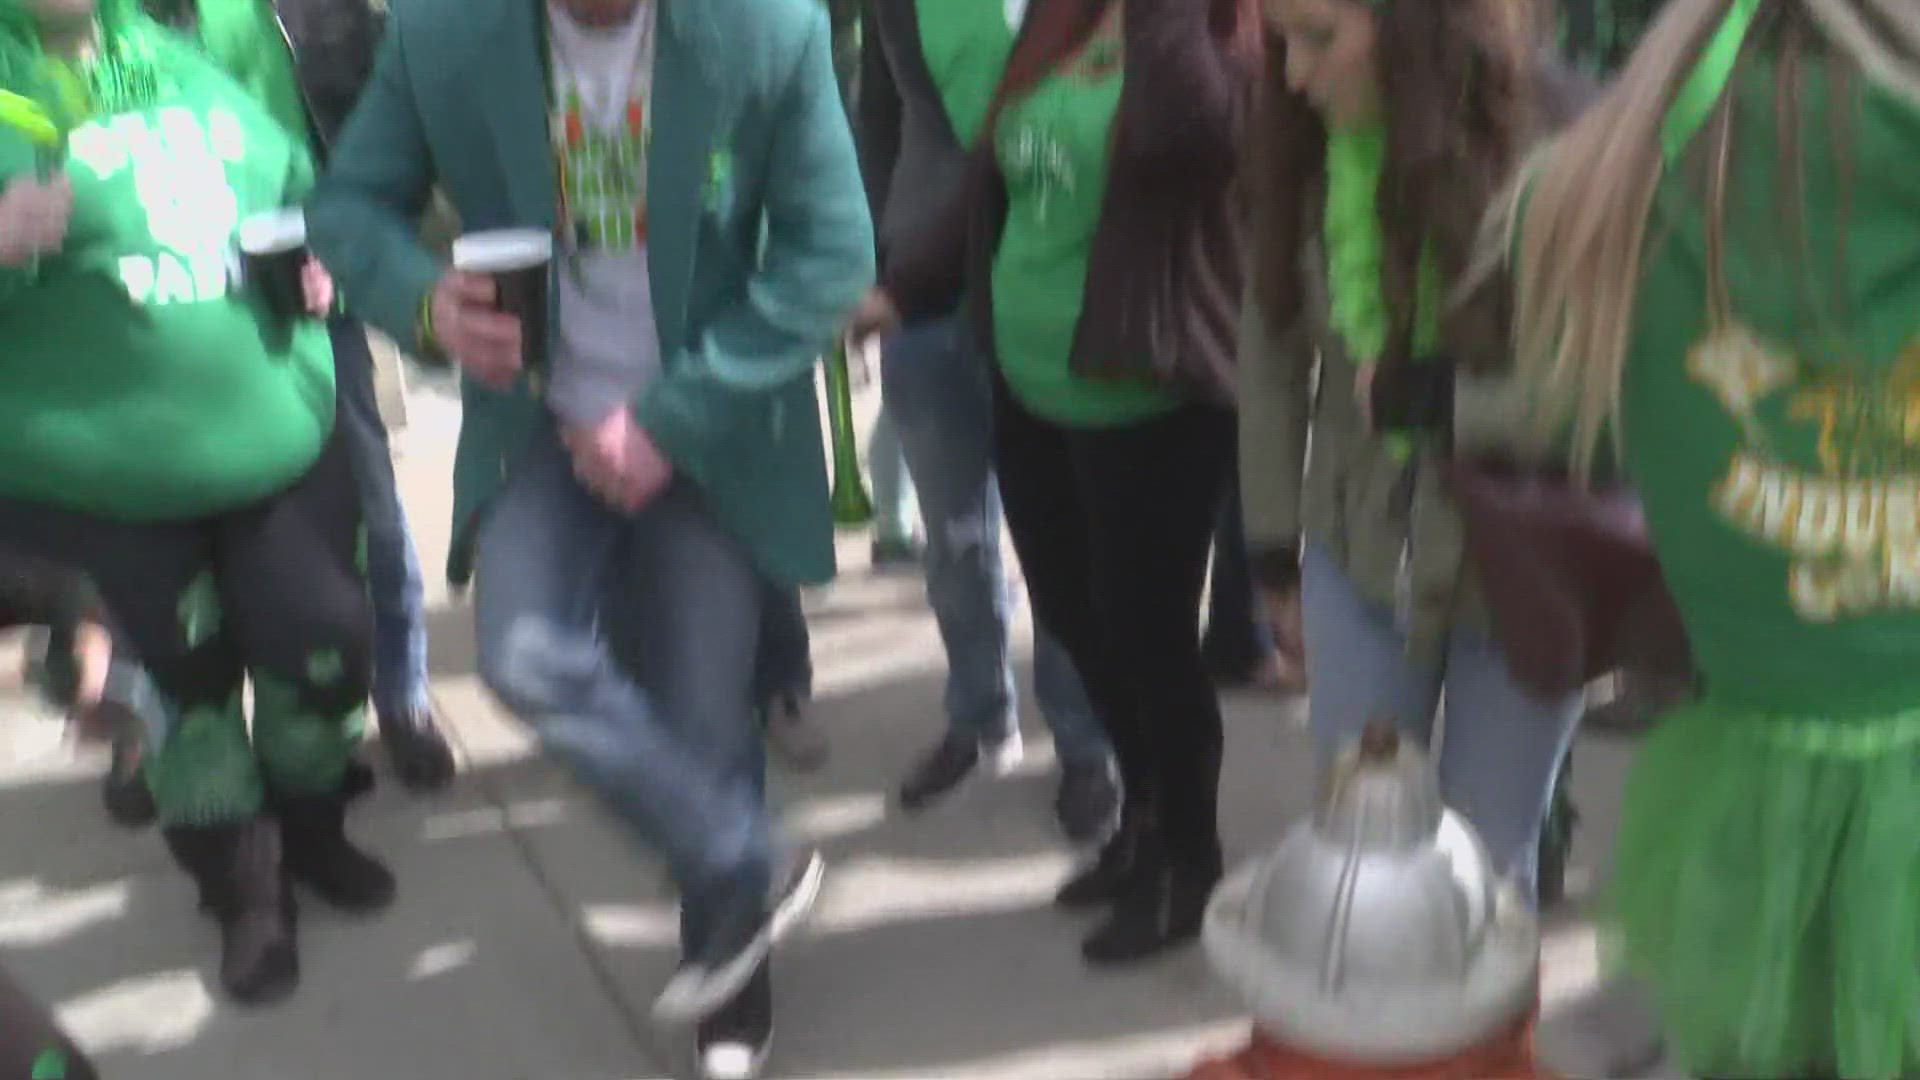 3News has compiled a list of events and parades happening across Northeast Ohio for St. Patrick's Day.